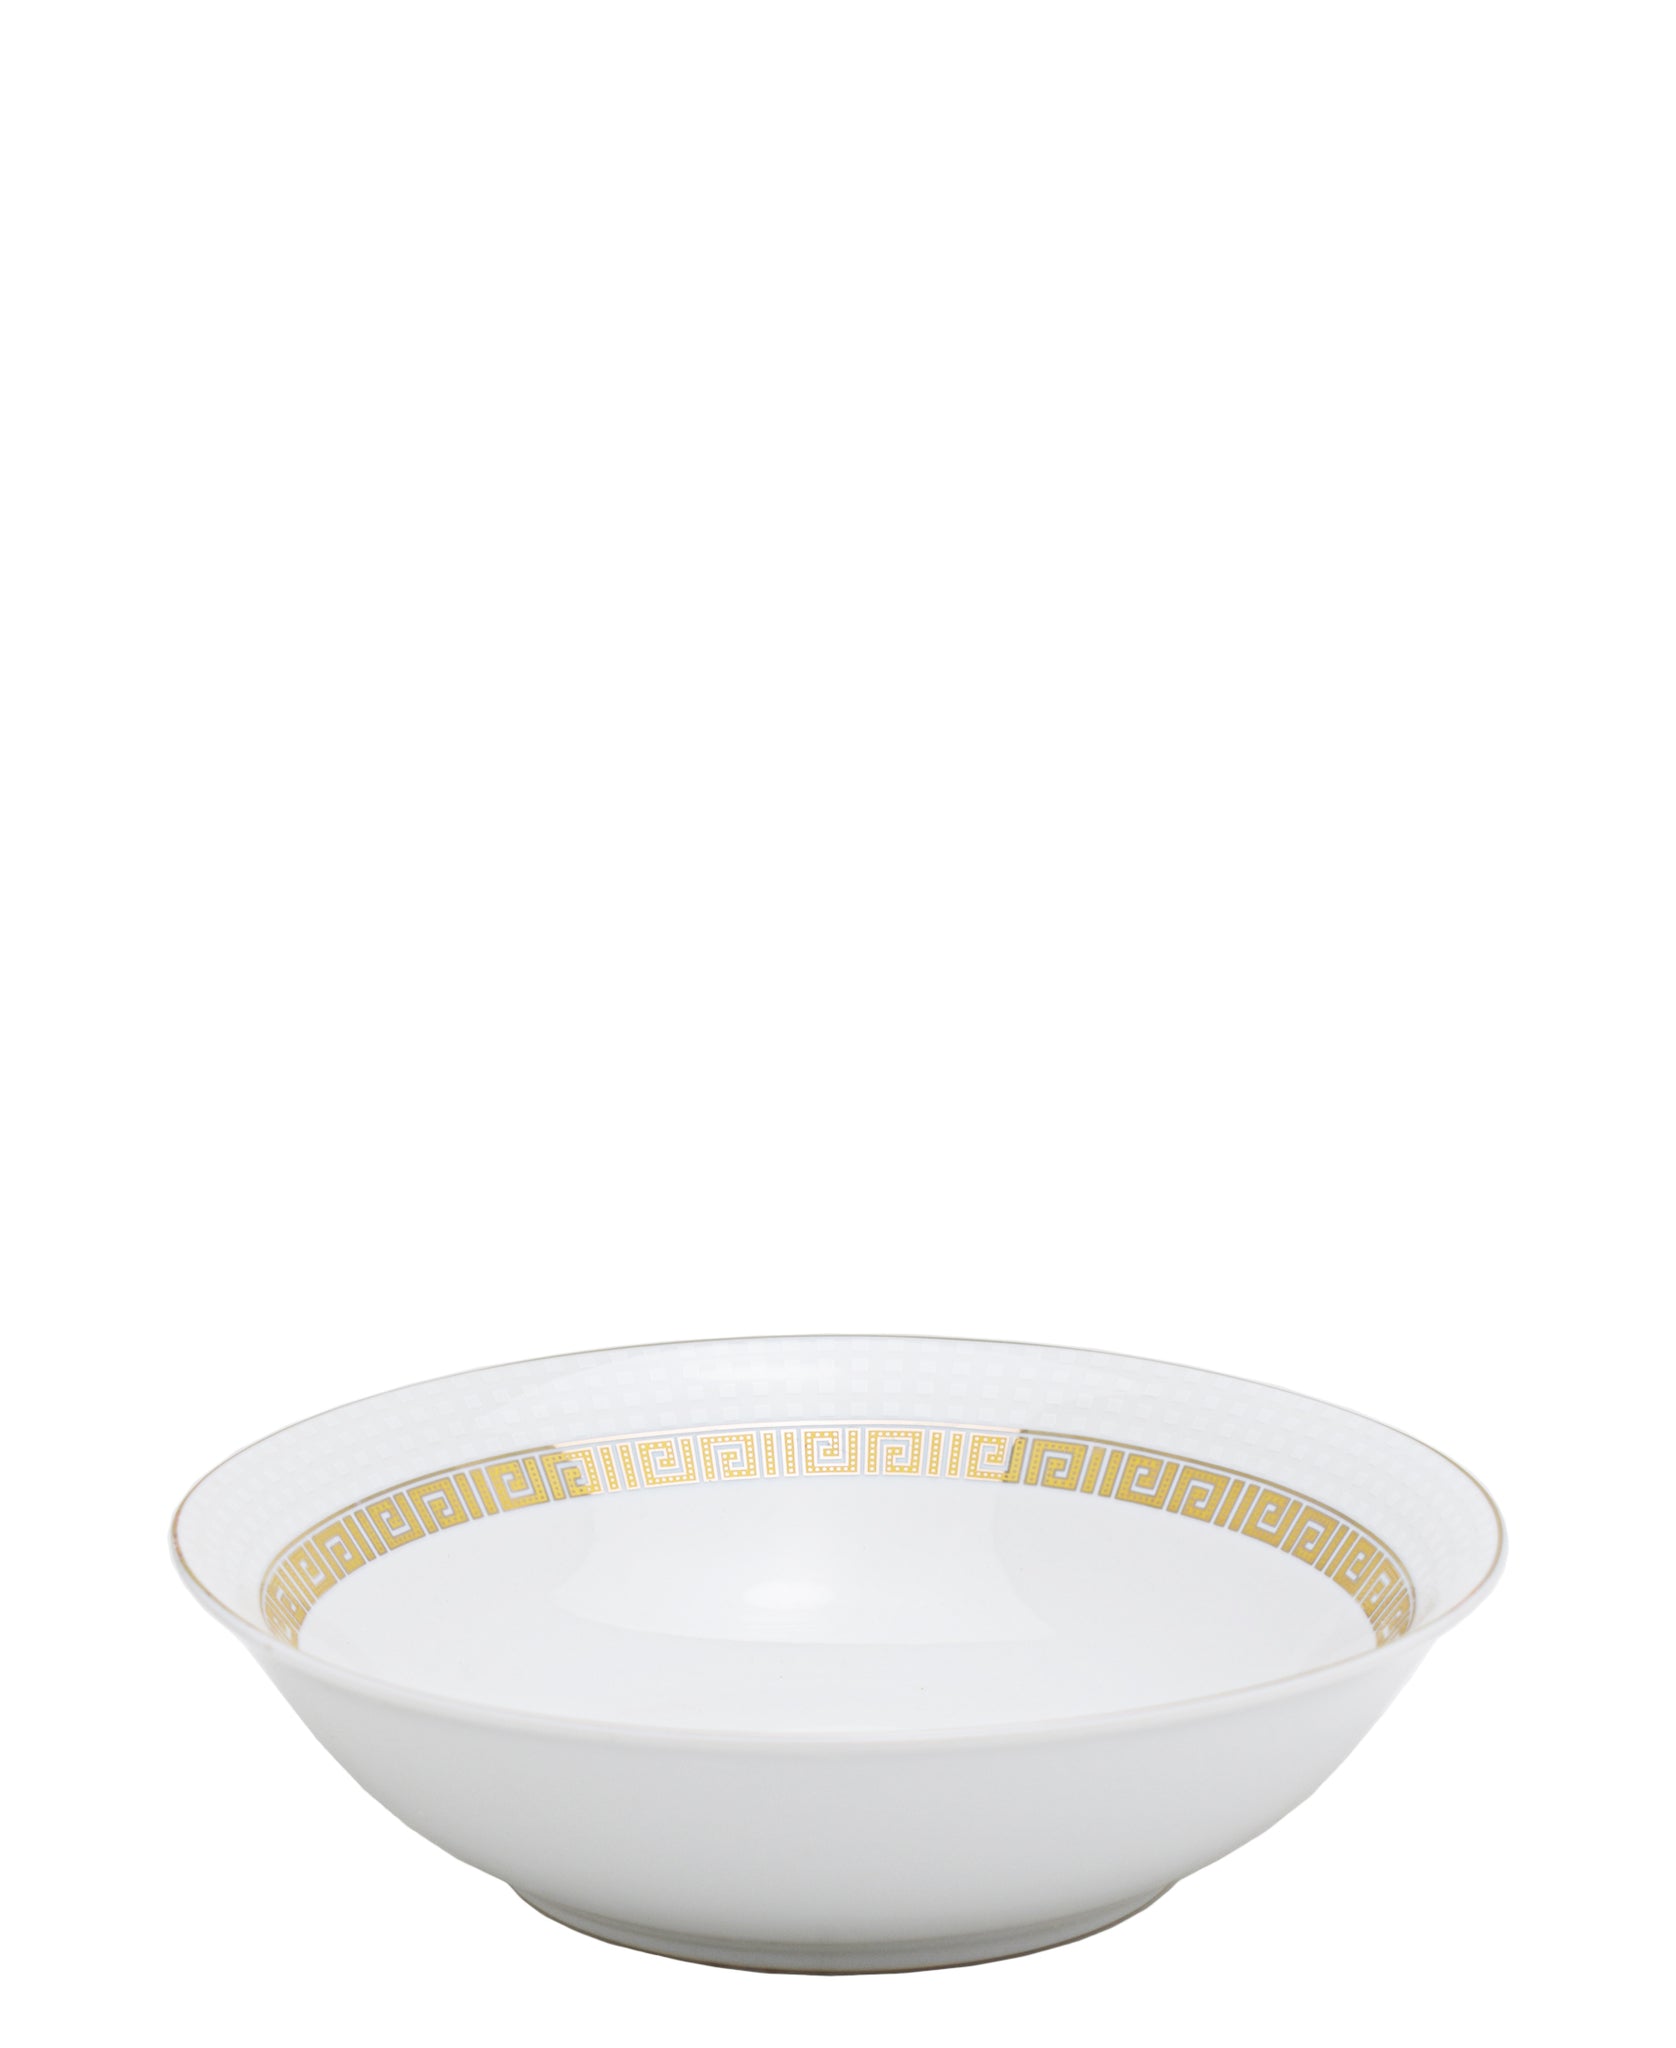 Table Pride 47 Piece Dinner Set - White With Gold Rim